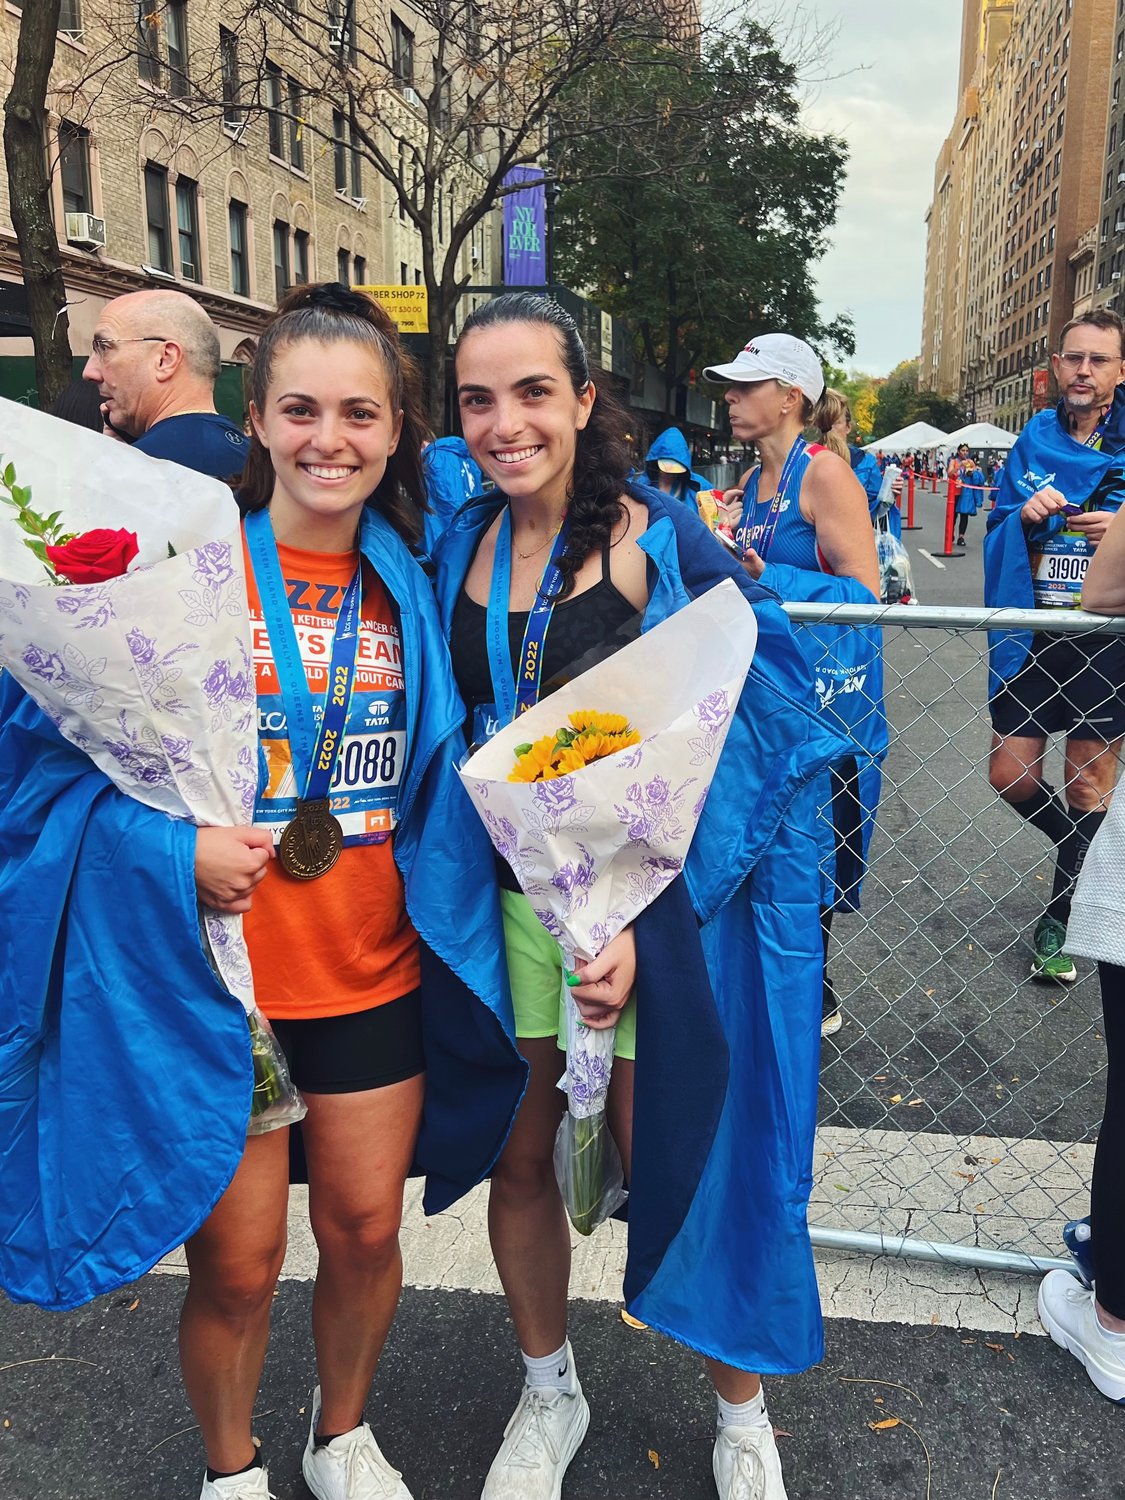 Isabelle Grillo, left, and her sister Sophia Grillo receive a warm welcome from friends and family members at the finish line.